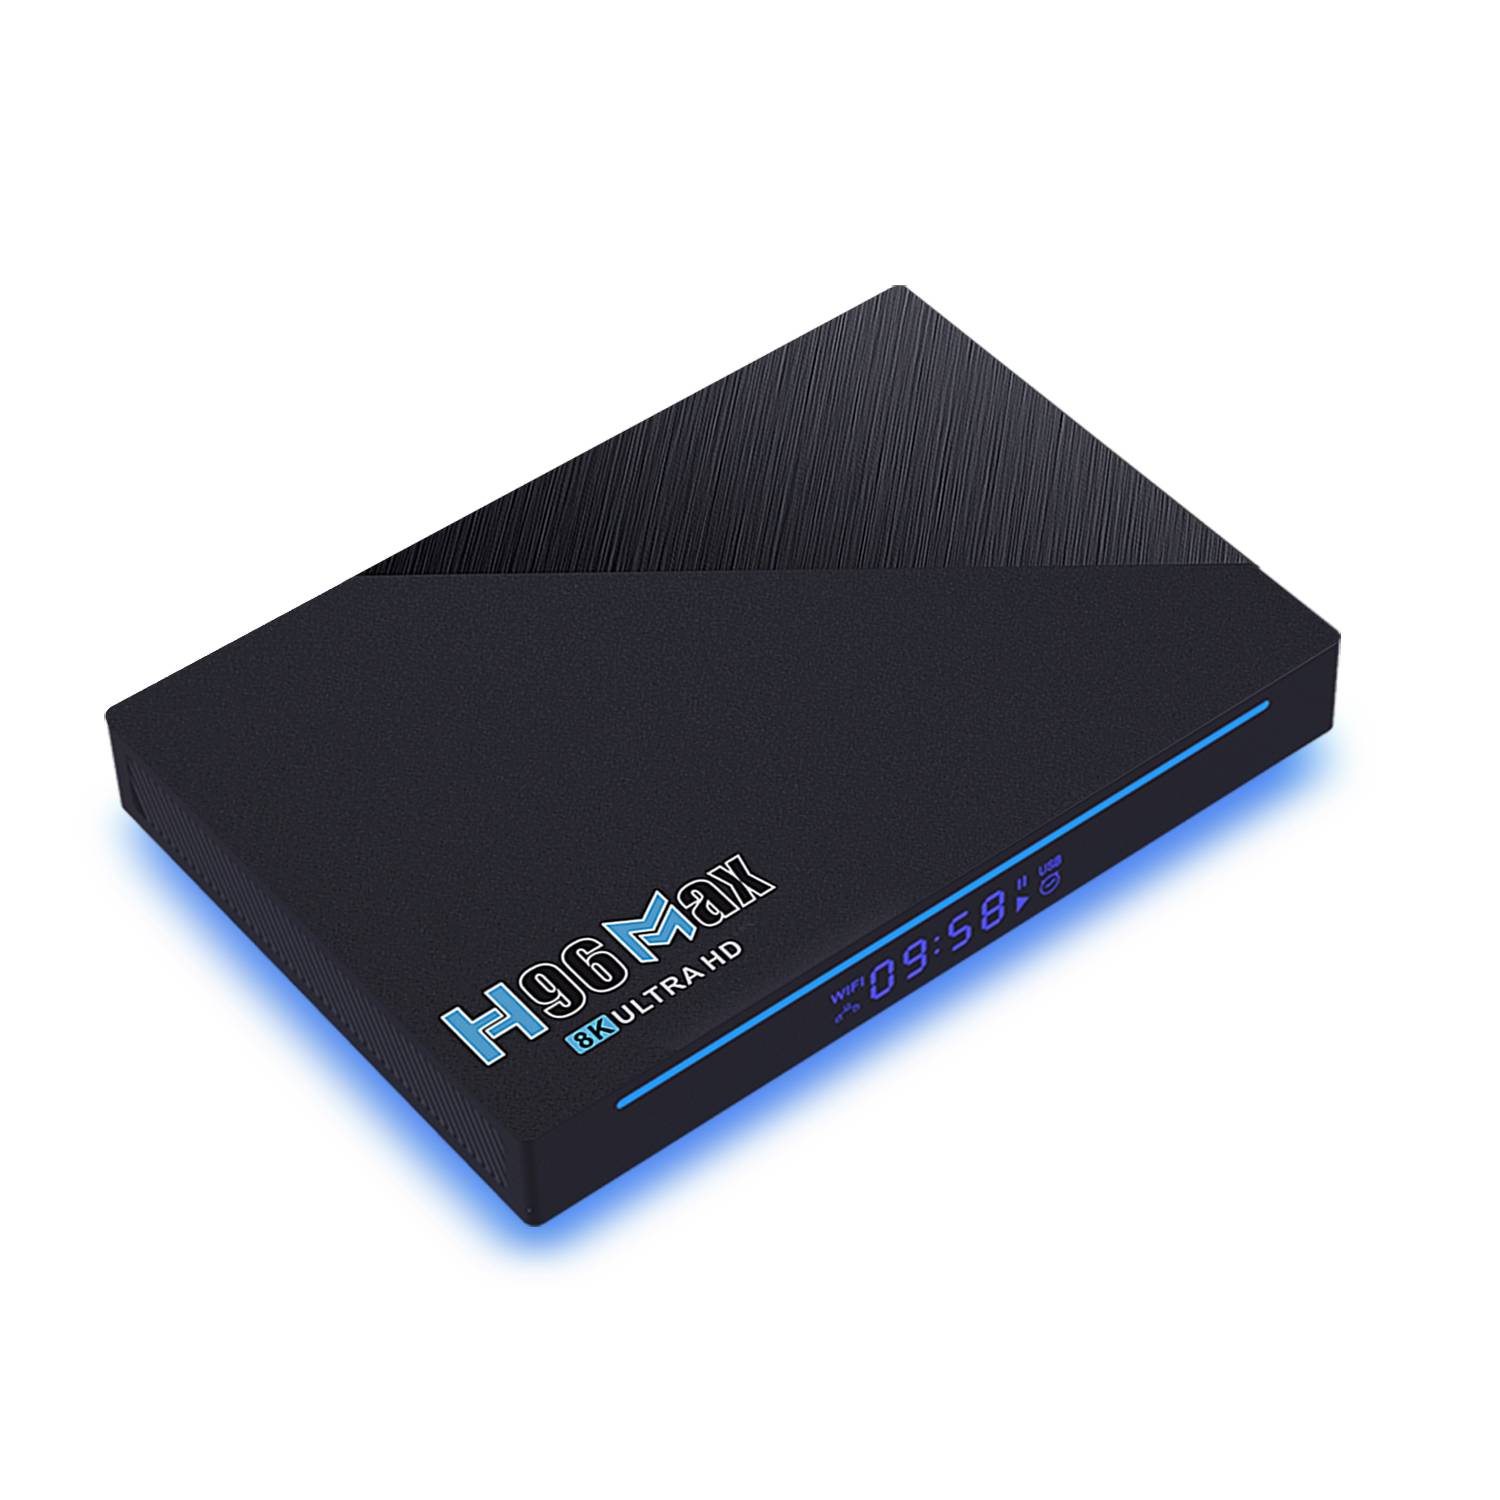 Wholesale Professional Custom Android TV Box Manufacturer in China-H96Max